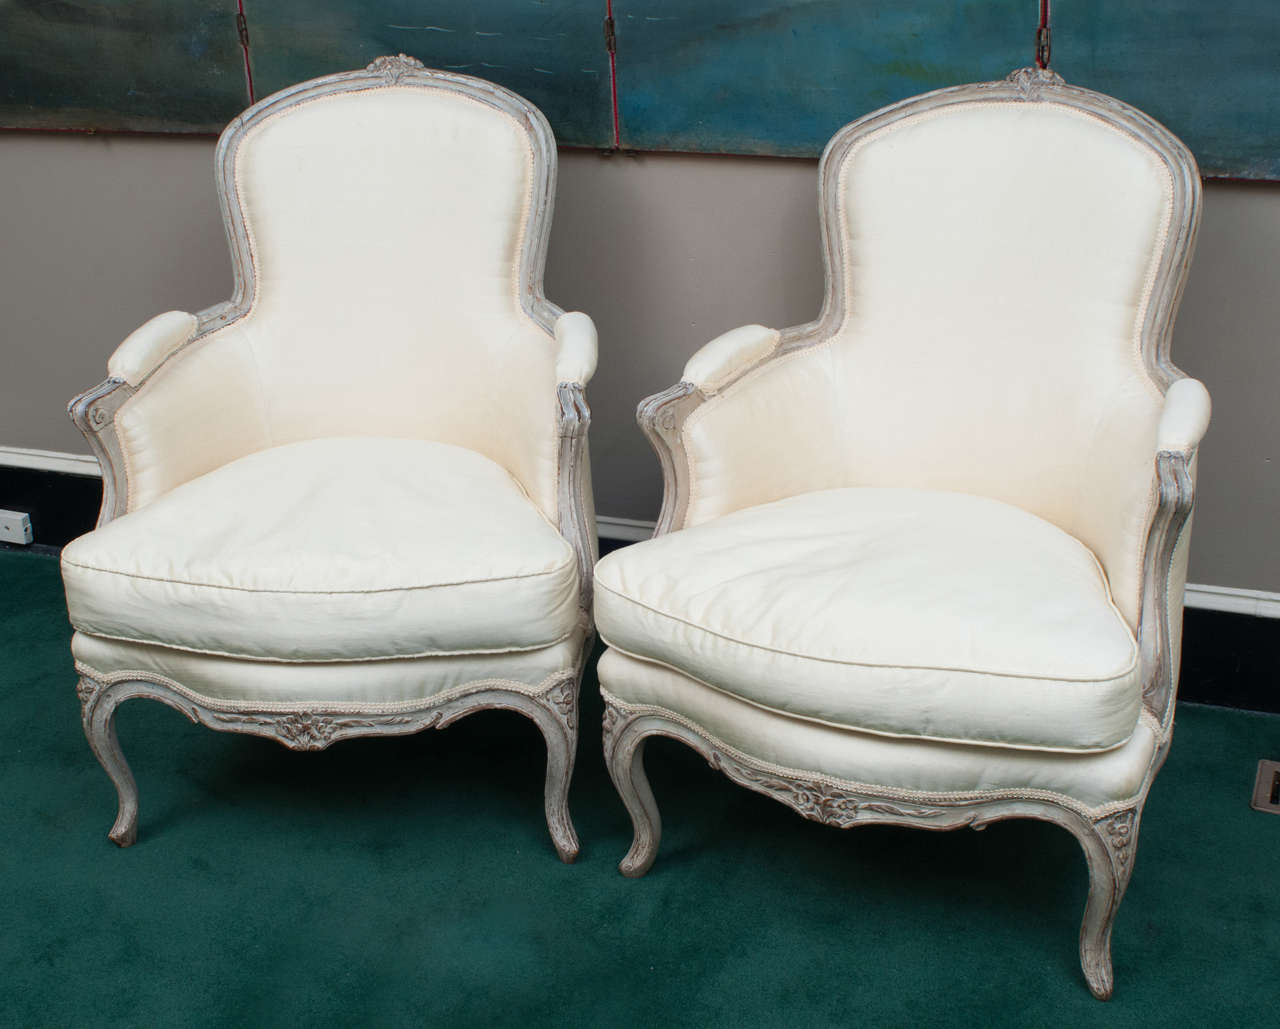 The fabric is a soft yellow Shantung type silk, the chairs have beech frames and are painted a soft grey with some wood showing thru which makes for a beautiful patina, very Fine carving and well proportioned.